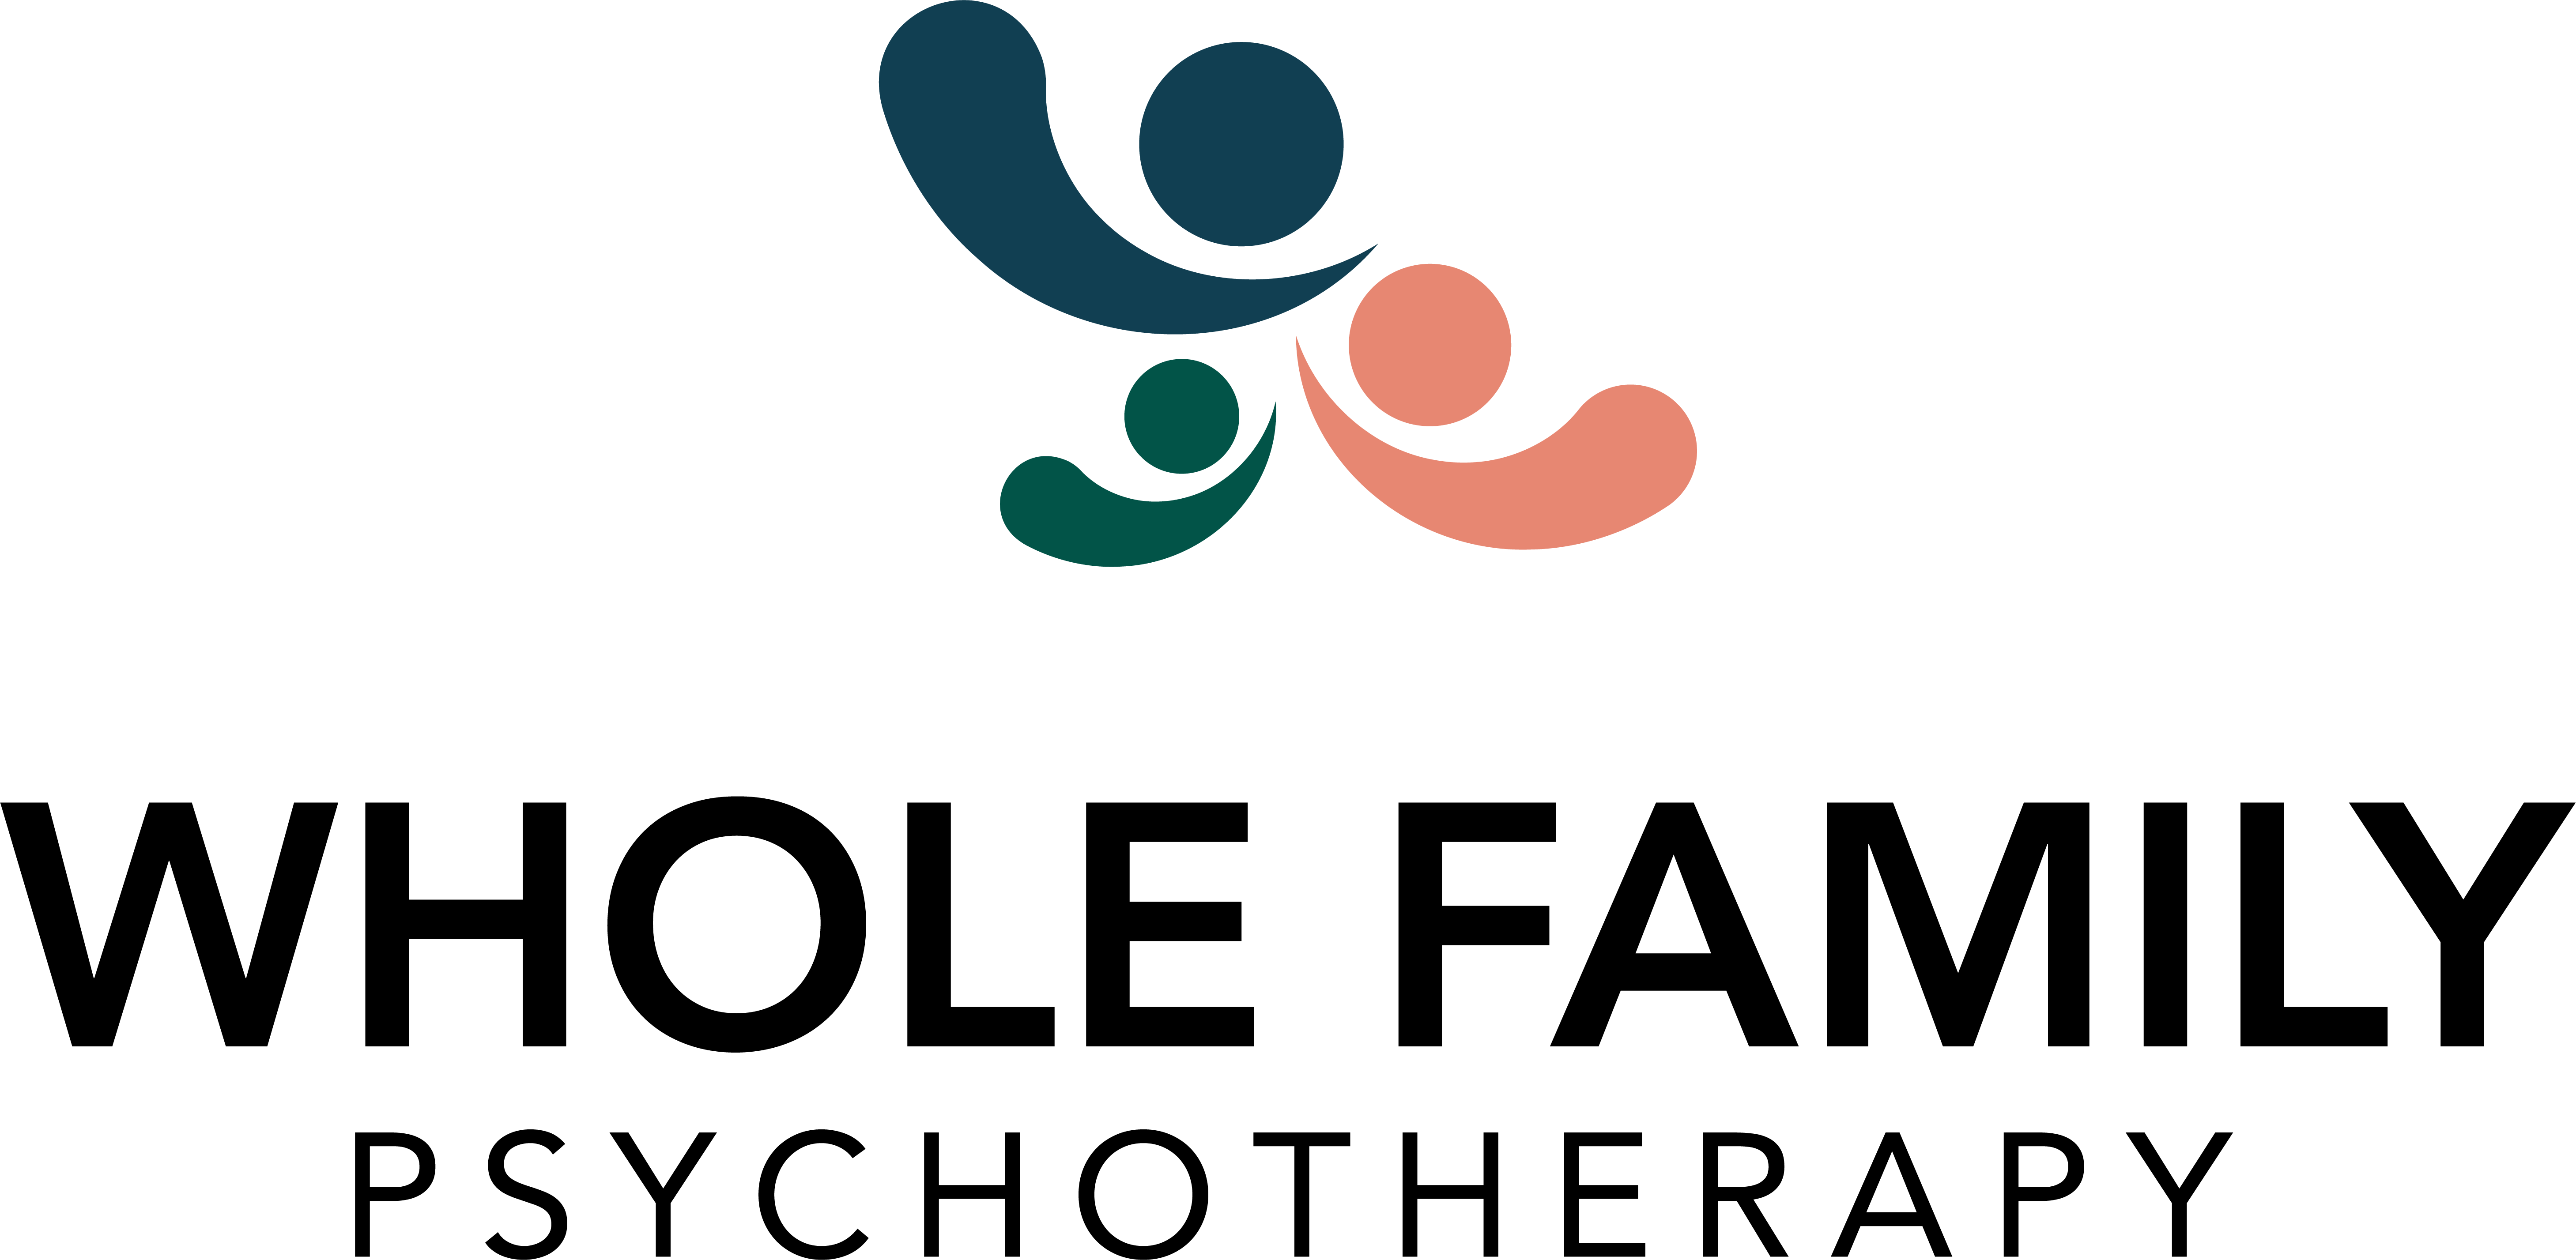 Whole Family Psychotherapy logo has three circles in navy, peach, and green that have swooshes in matching colours beneath them.